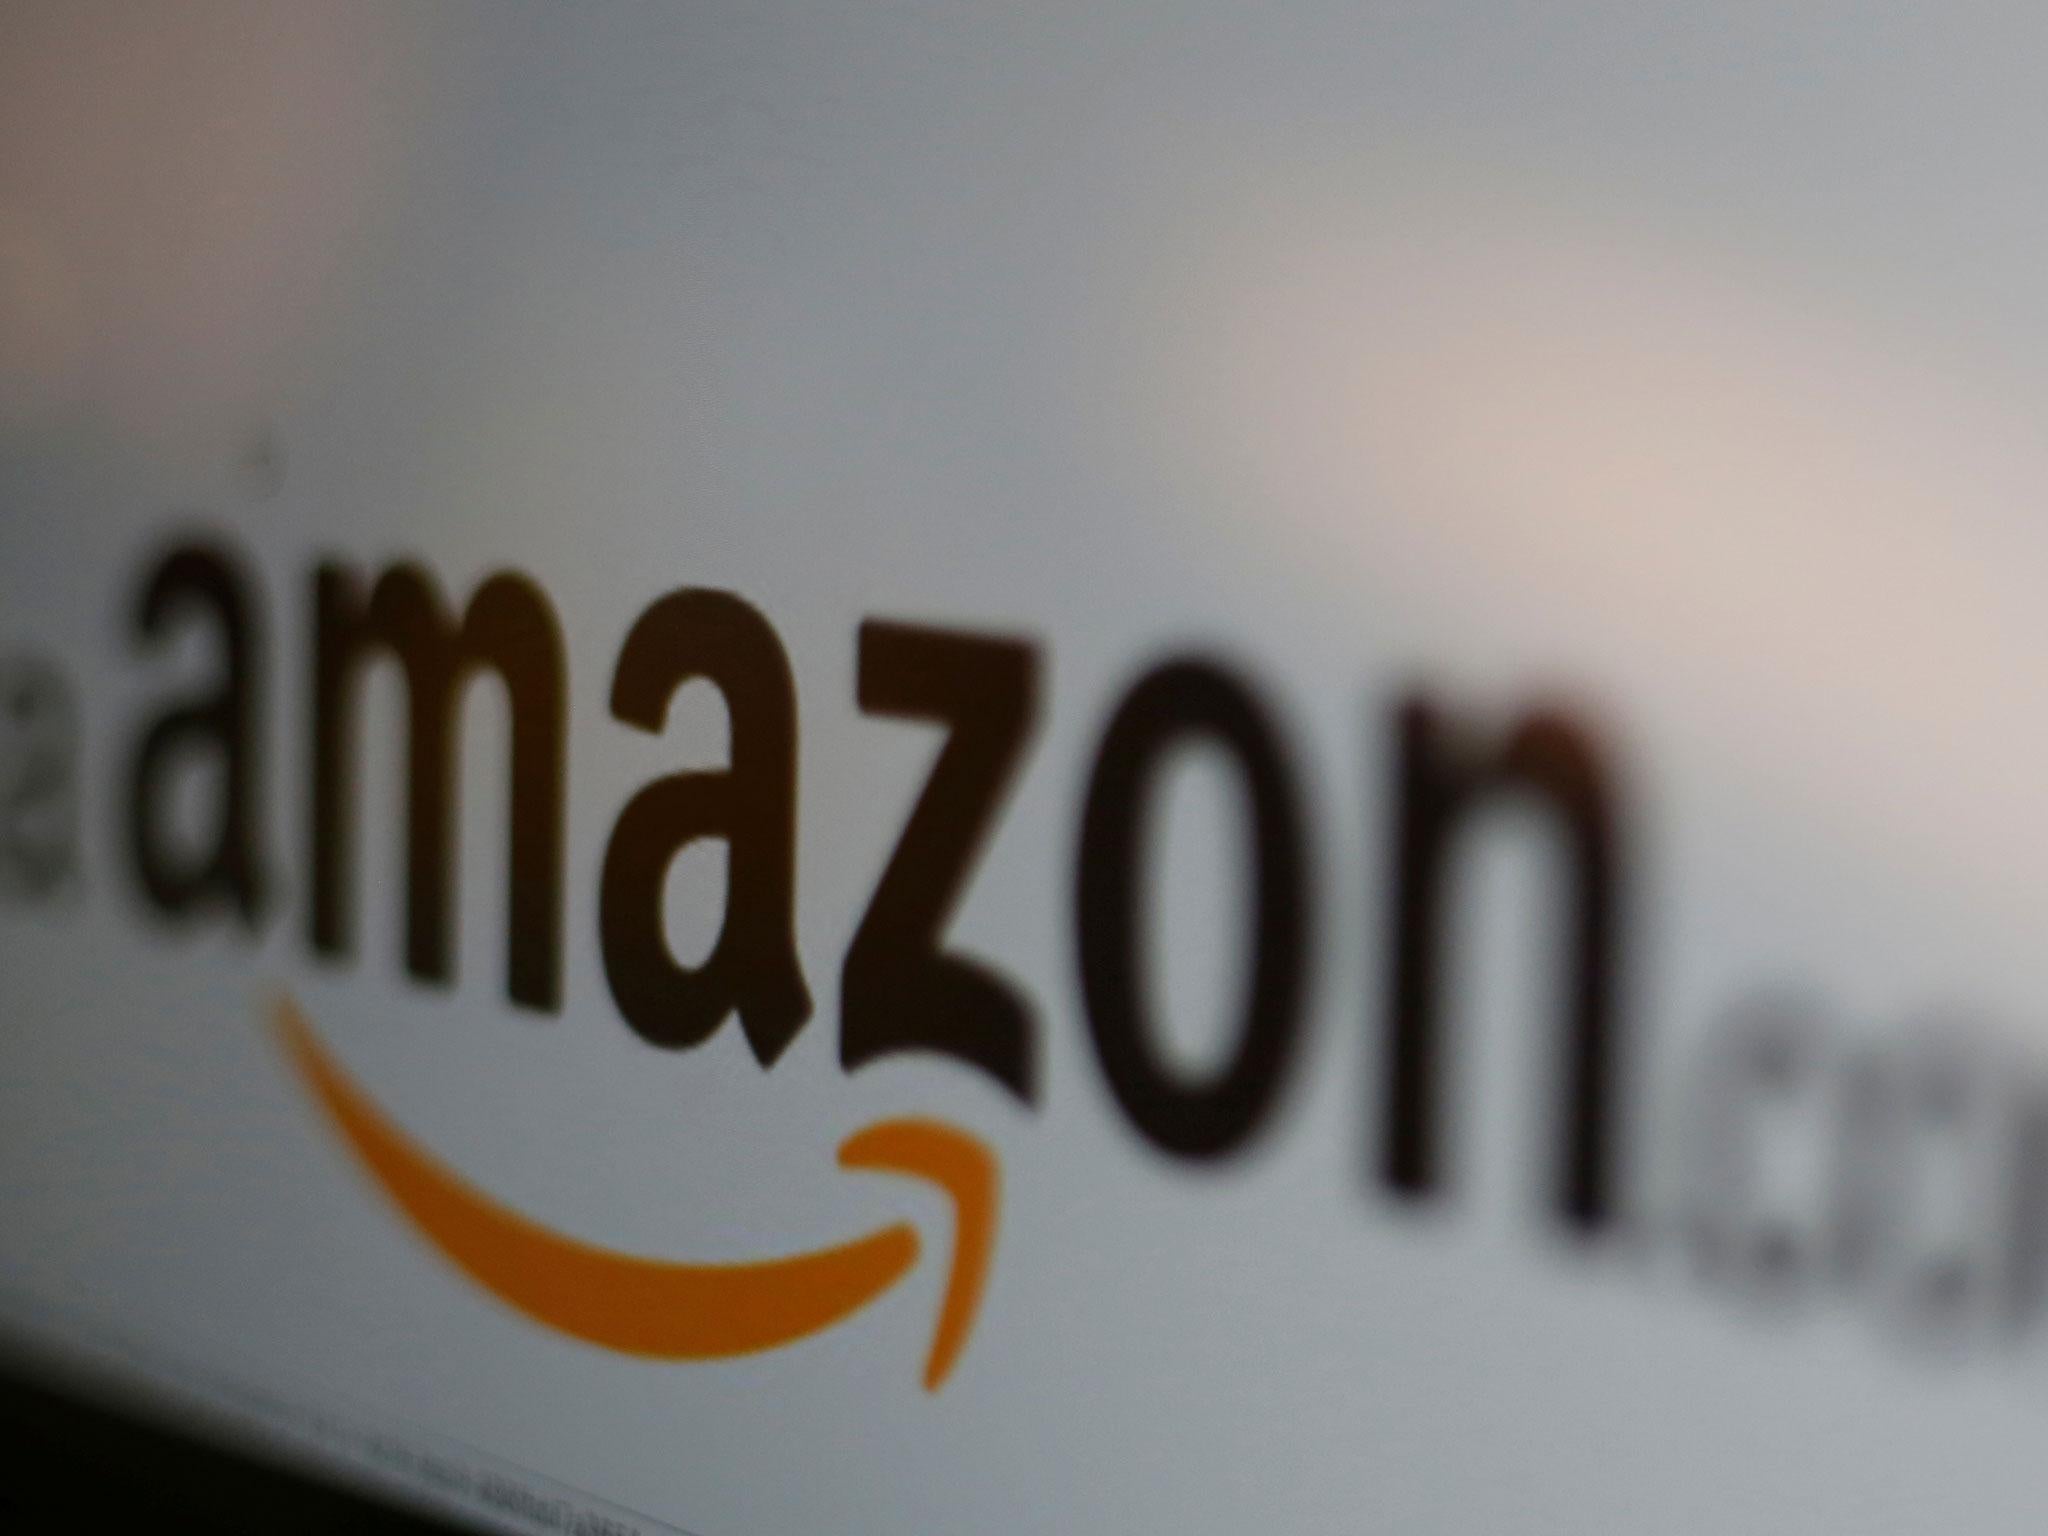 Richard Allen of campaign group, Retailers Against VAT Fraud, said it was “easy” to find companies avoiding tax on Amazon’s marketplace, which hosts thousands of third-party sellers